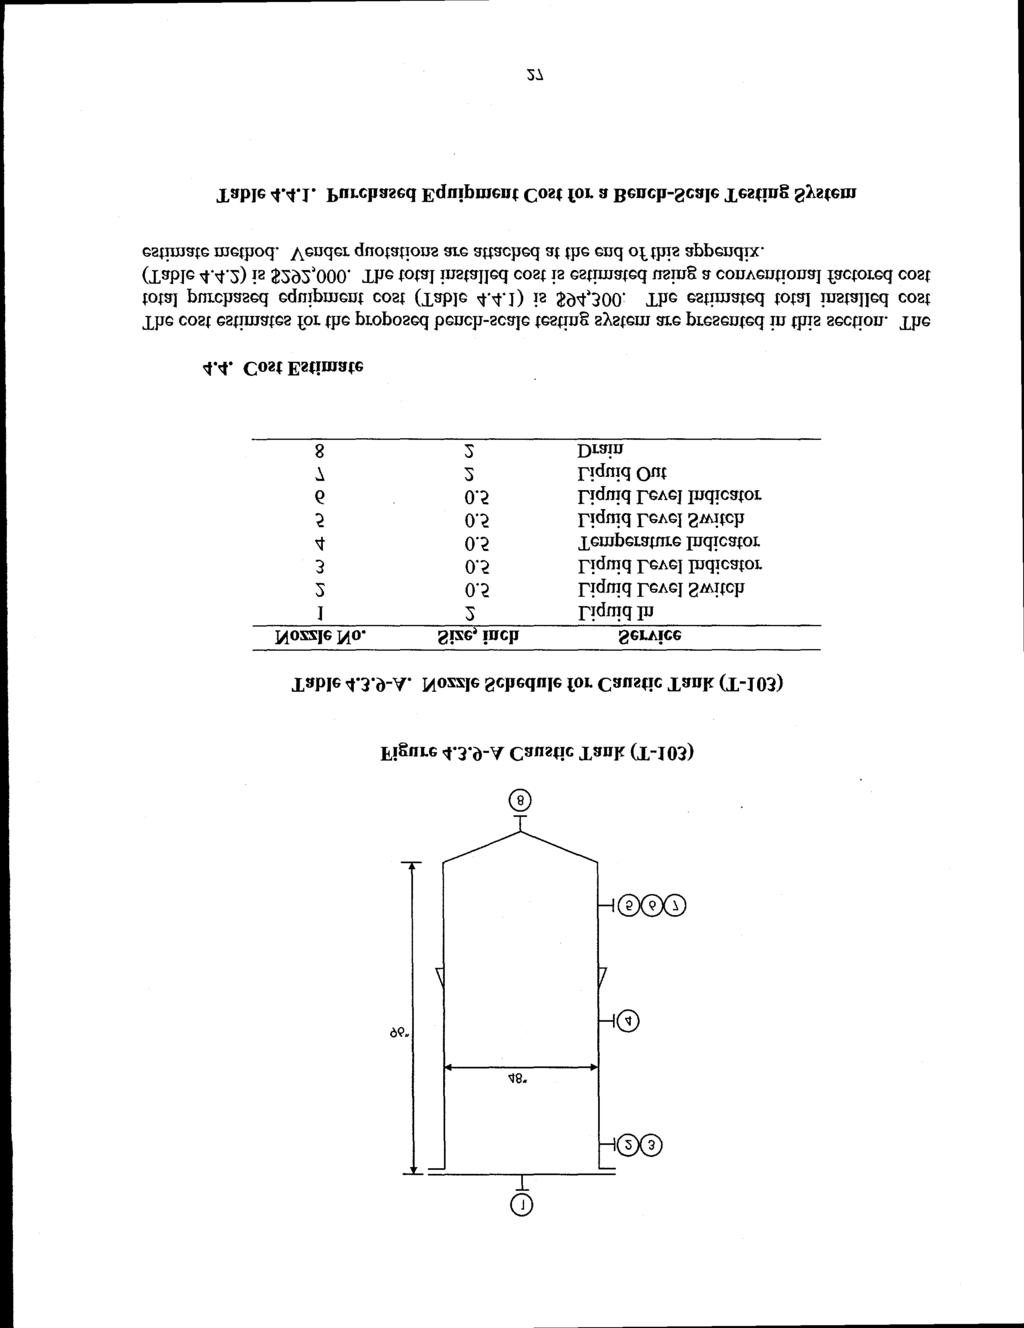 Figure 4.3.9-A Caustic Tank (T-103) Table 4.3.9-A. Nozzle Schedule for Caustic Tank (T-103) Nozzle No. Size, inch Service 1 2 Liquid In 2 0.5 Liquid Level Switch 3 0.5 Liquid Level Indicator 4 0.